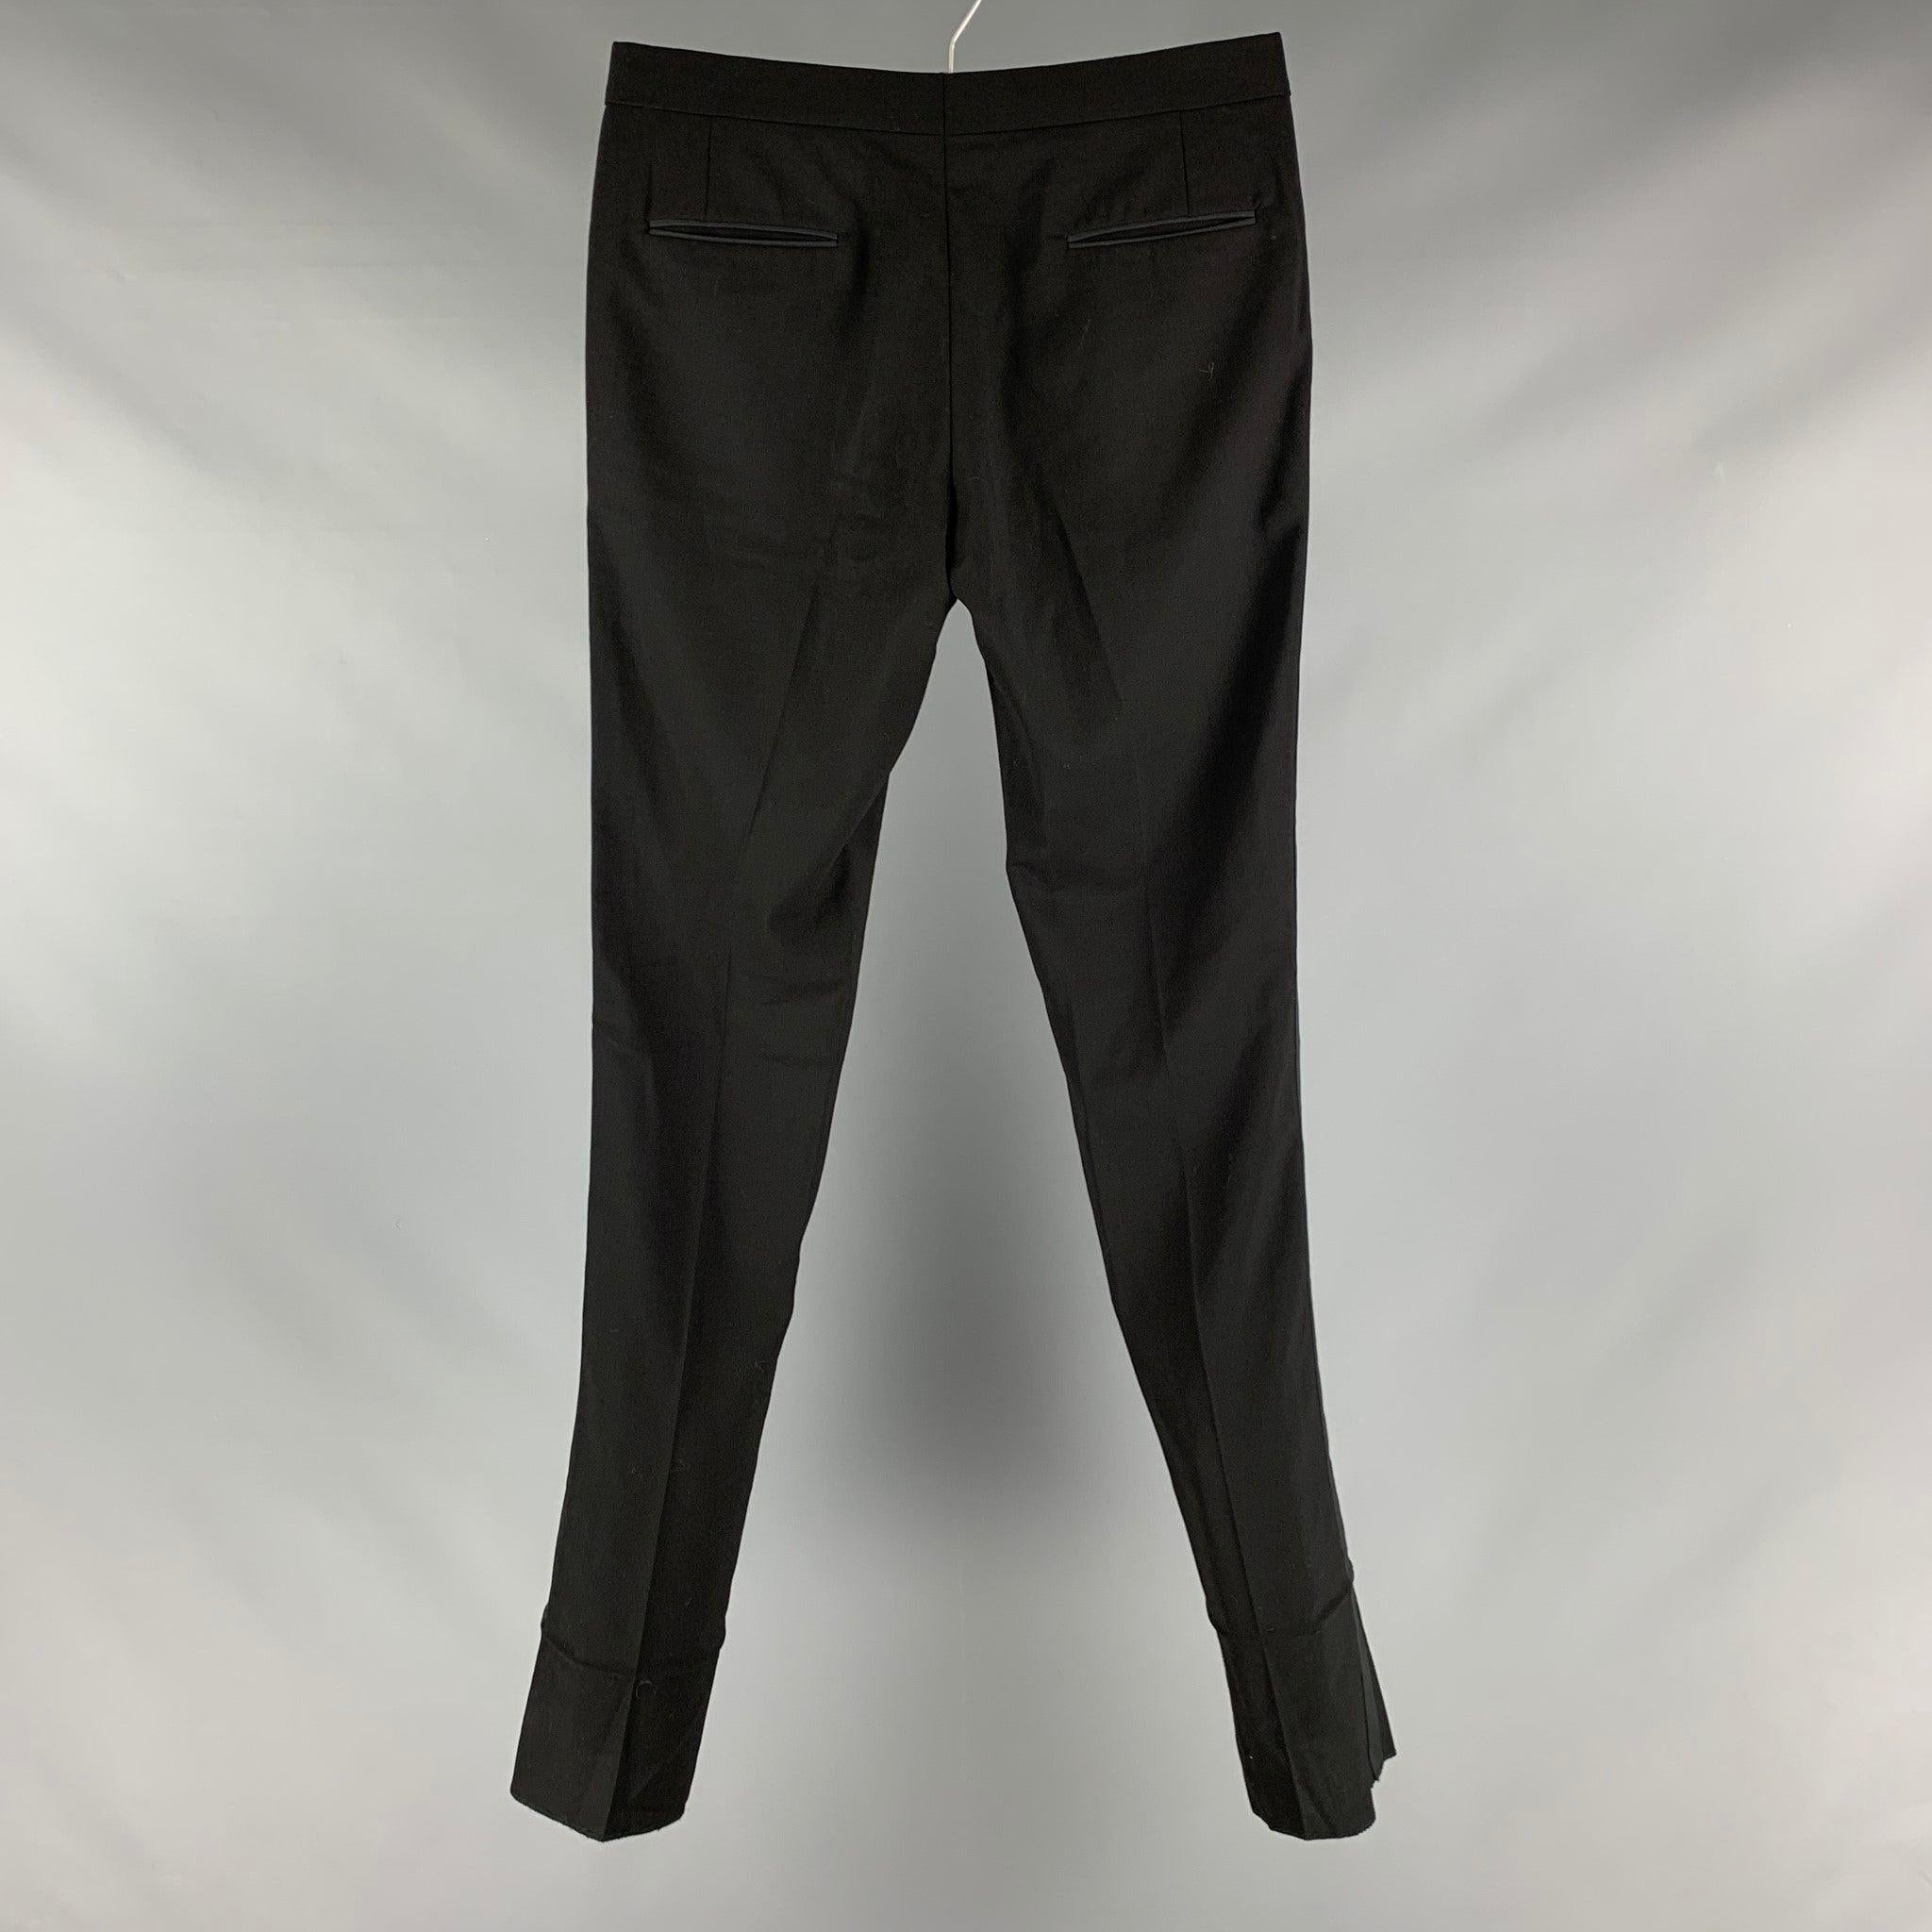 BAND OF OUTSIDERS dress pants comes in a black wool woven material featuring a
 tuxedo stripe, front tab, and a zip fly closure. Made in USA.Excellent Pre-Owned Conditions. 

Marked:  32 

Measurements: 
 Waist: 32 inches Rise: 8.5 inches Inseam: 38